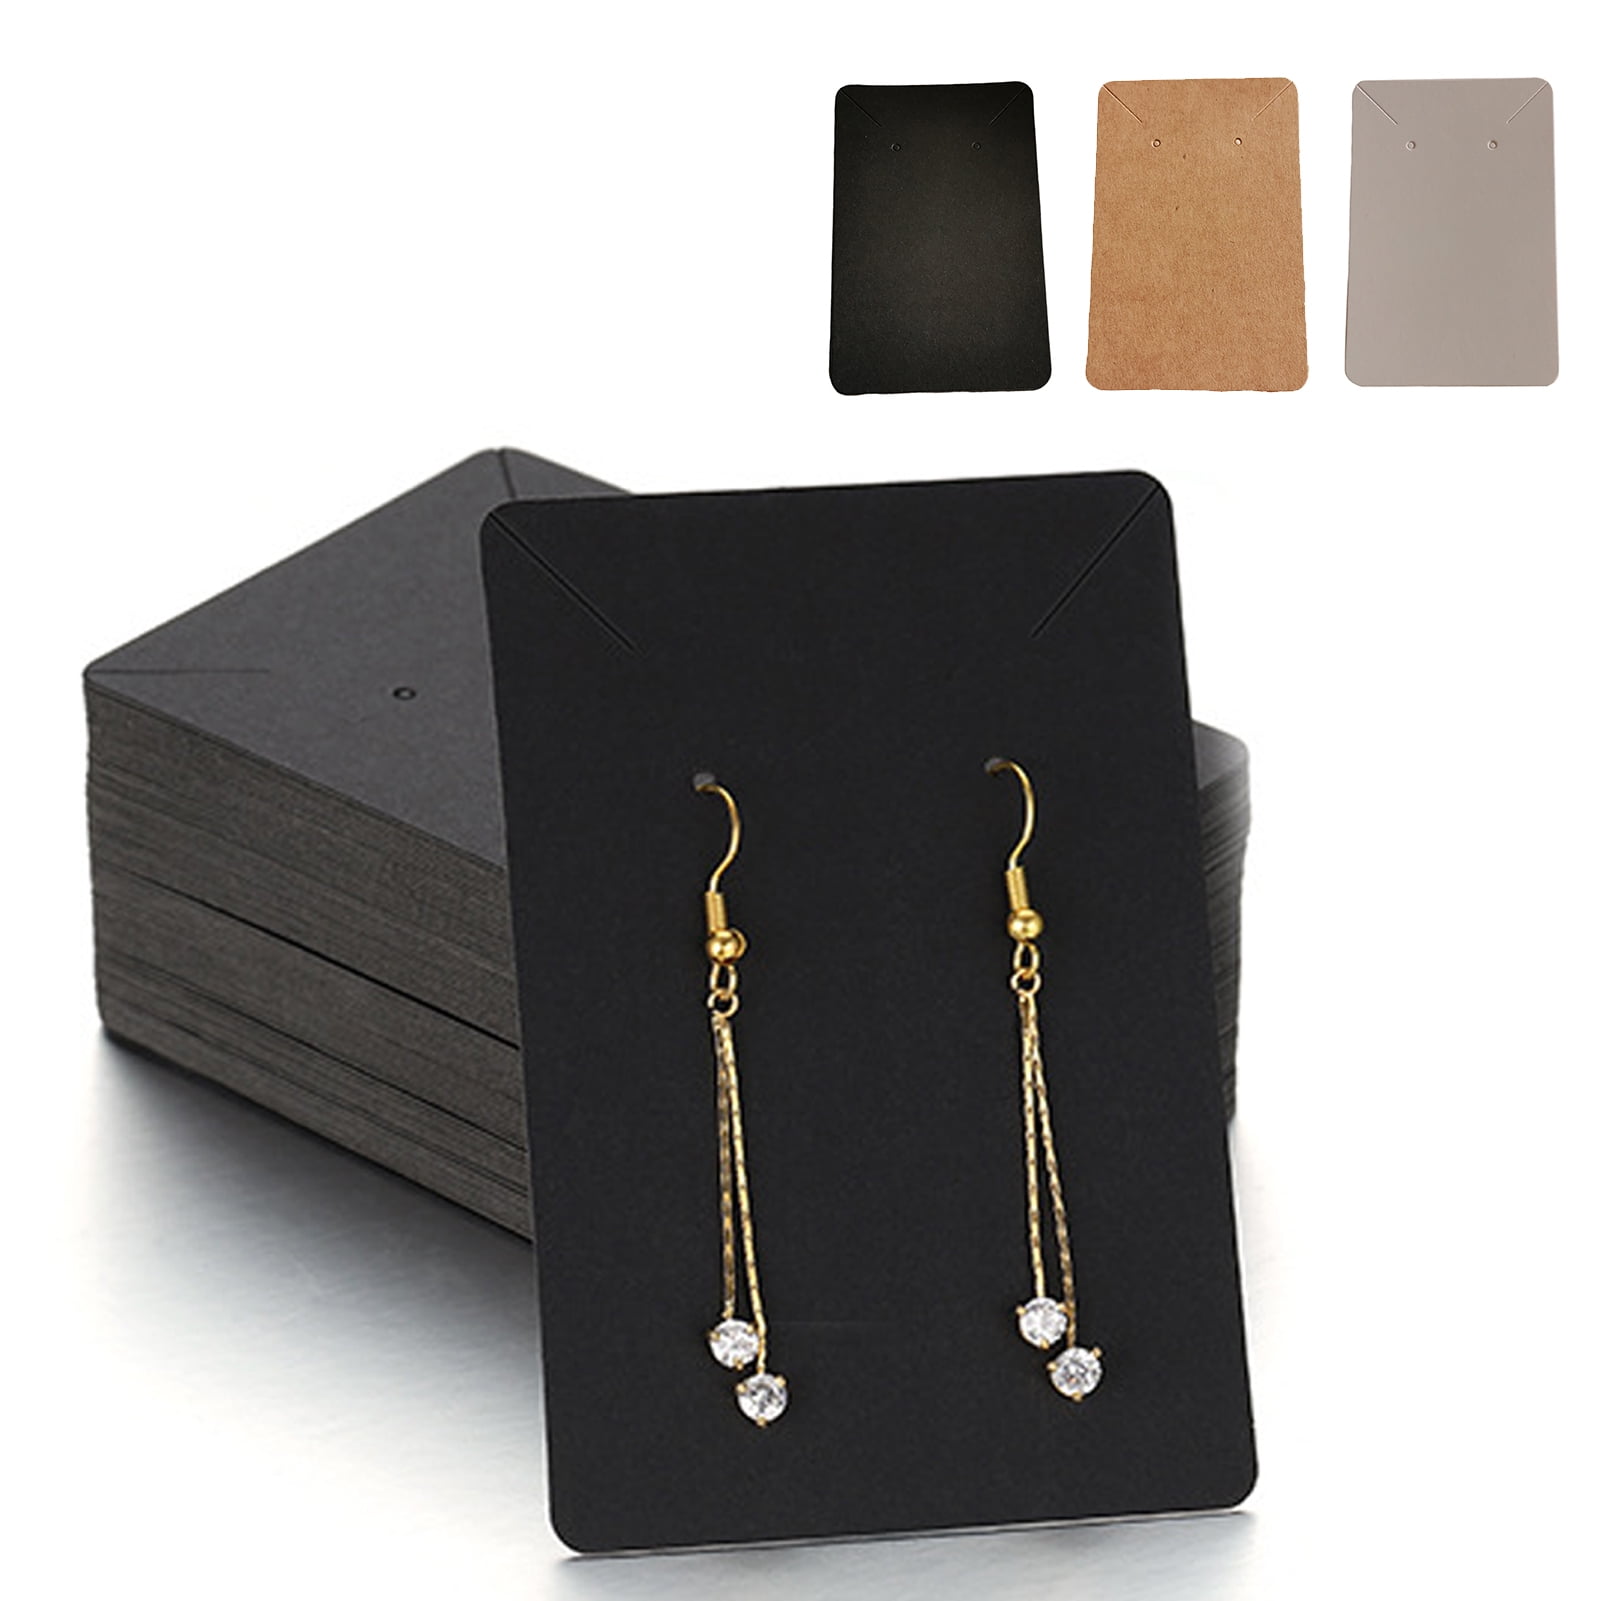 200pcs Earring Display Cards Set, Including 50pcs Earring Display Cards,  50pcs Self-Sealing Bags And 100pcs Earring Backs And Pendant Display Cards  For Diy Jewelry Presentation